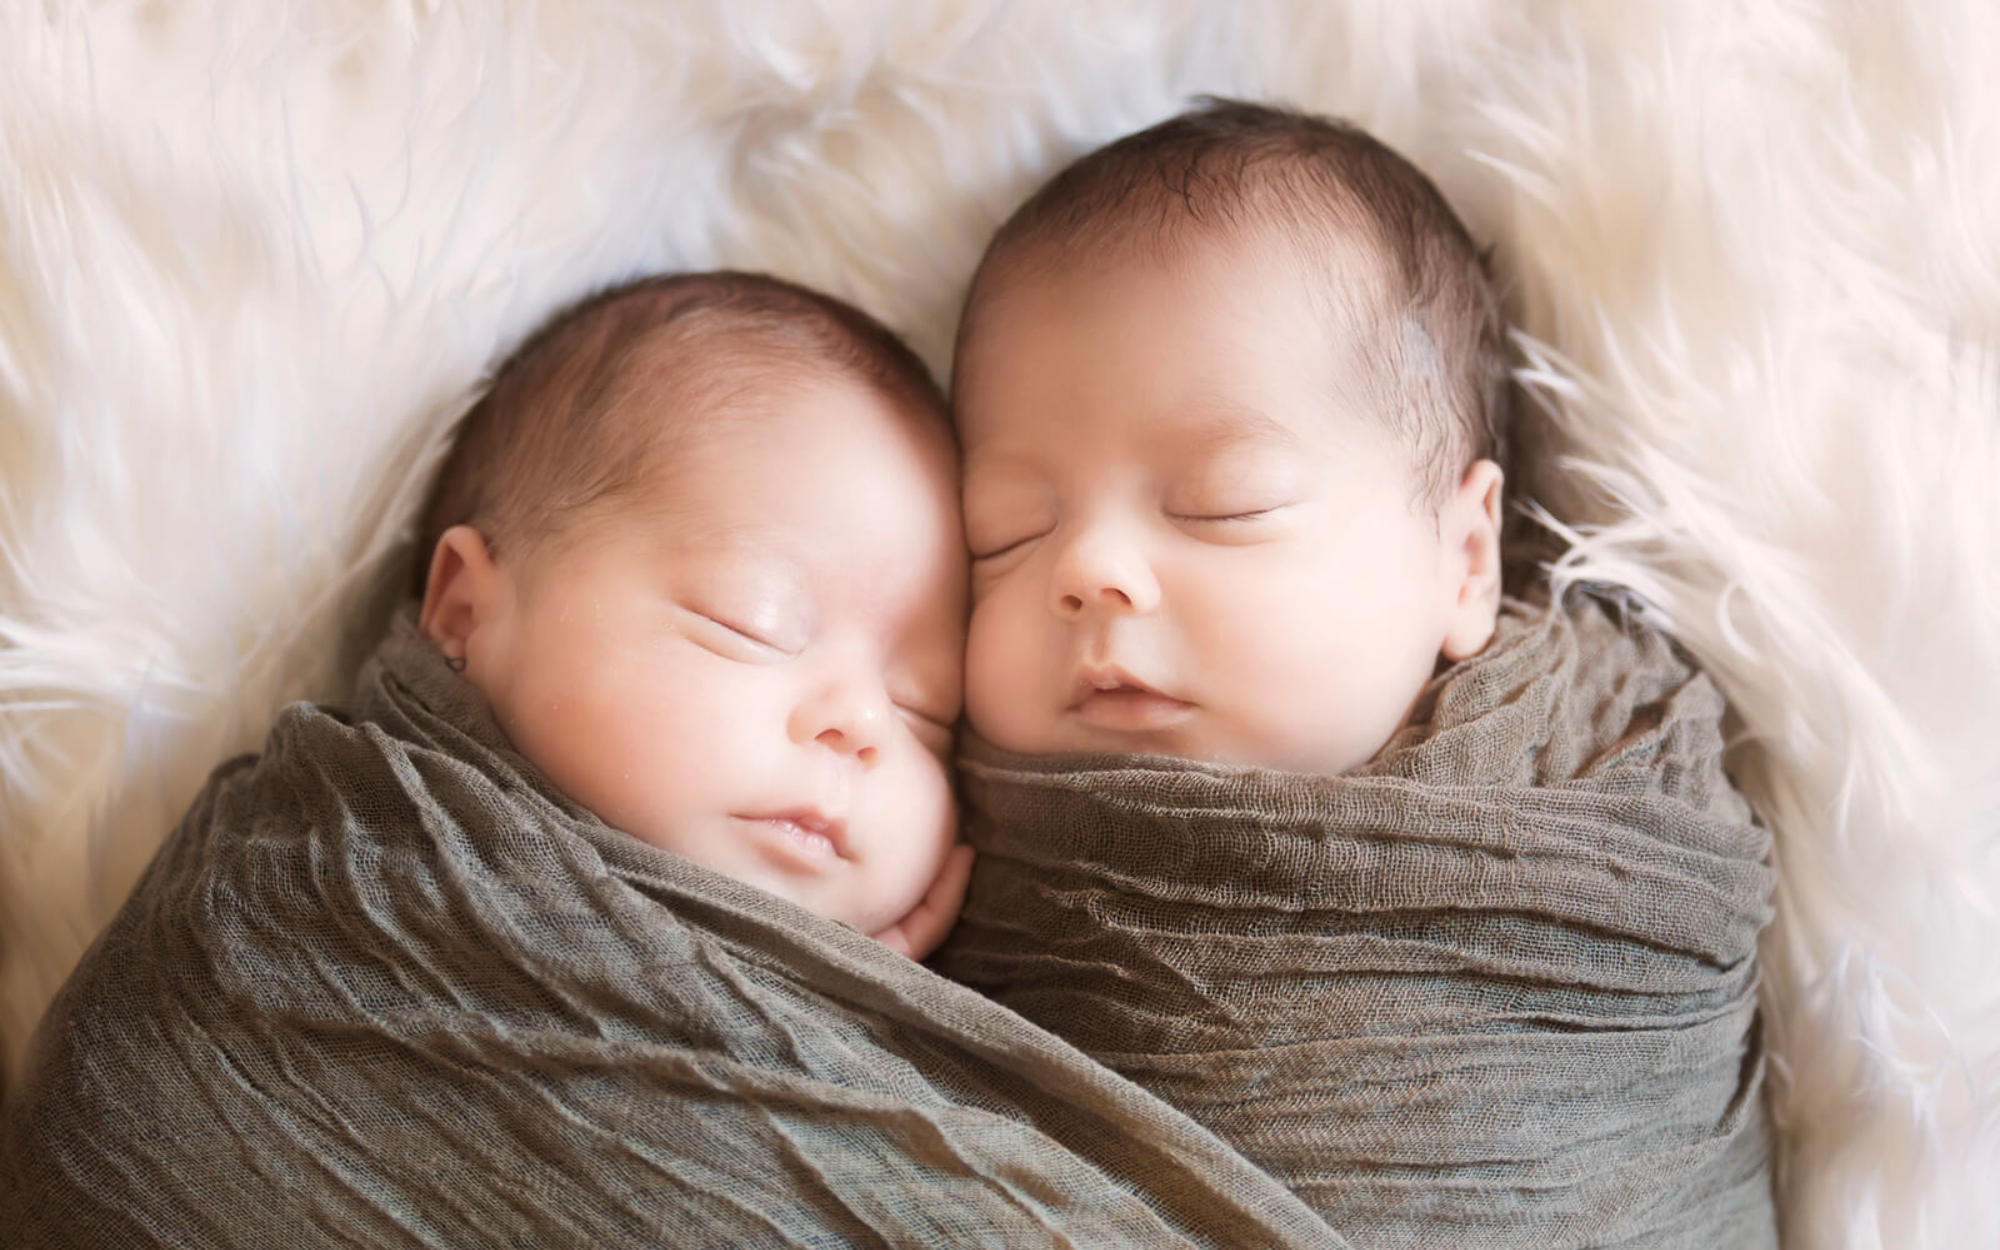 Mother Confirmed Her Twins Are Half-Brothers With Different Biological Fathers